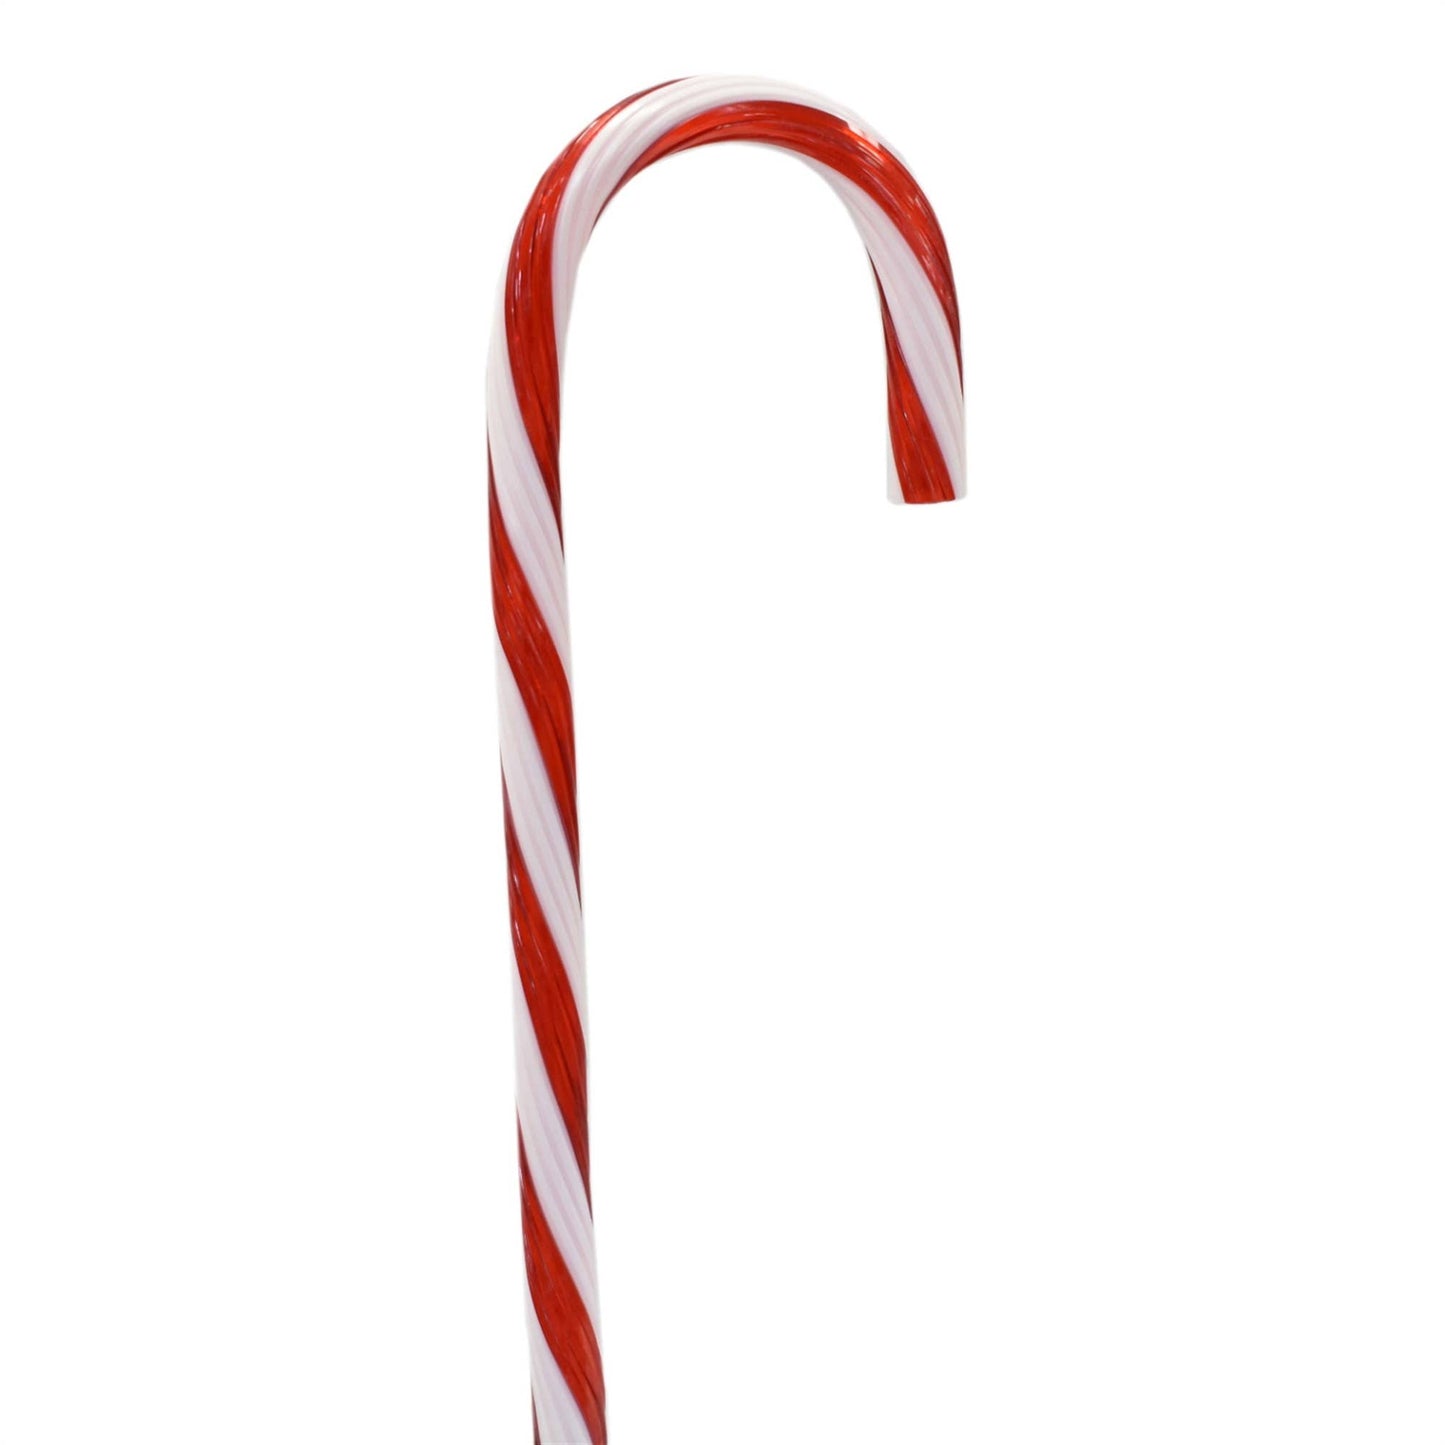 Striped Candy Cane 18" - Red/White-Acrylic